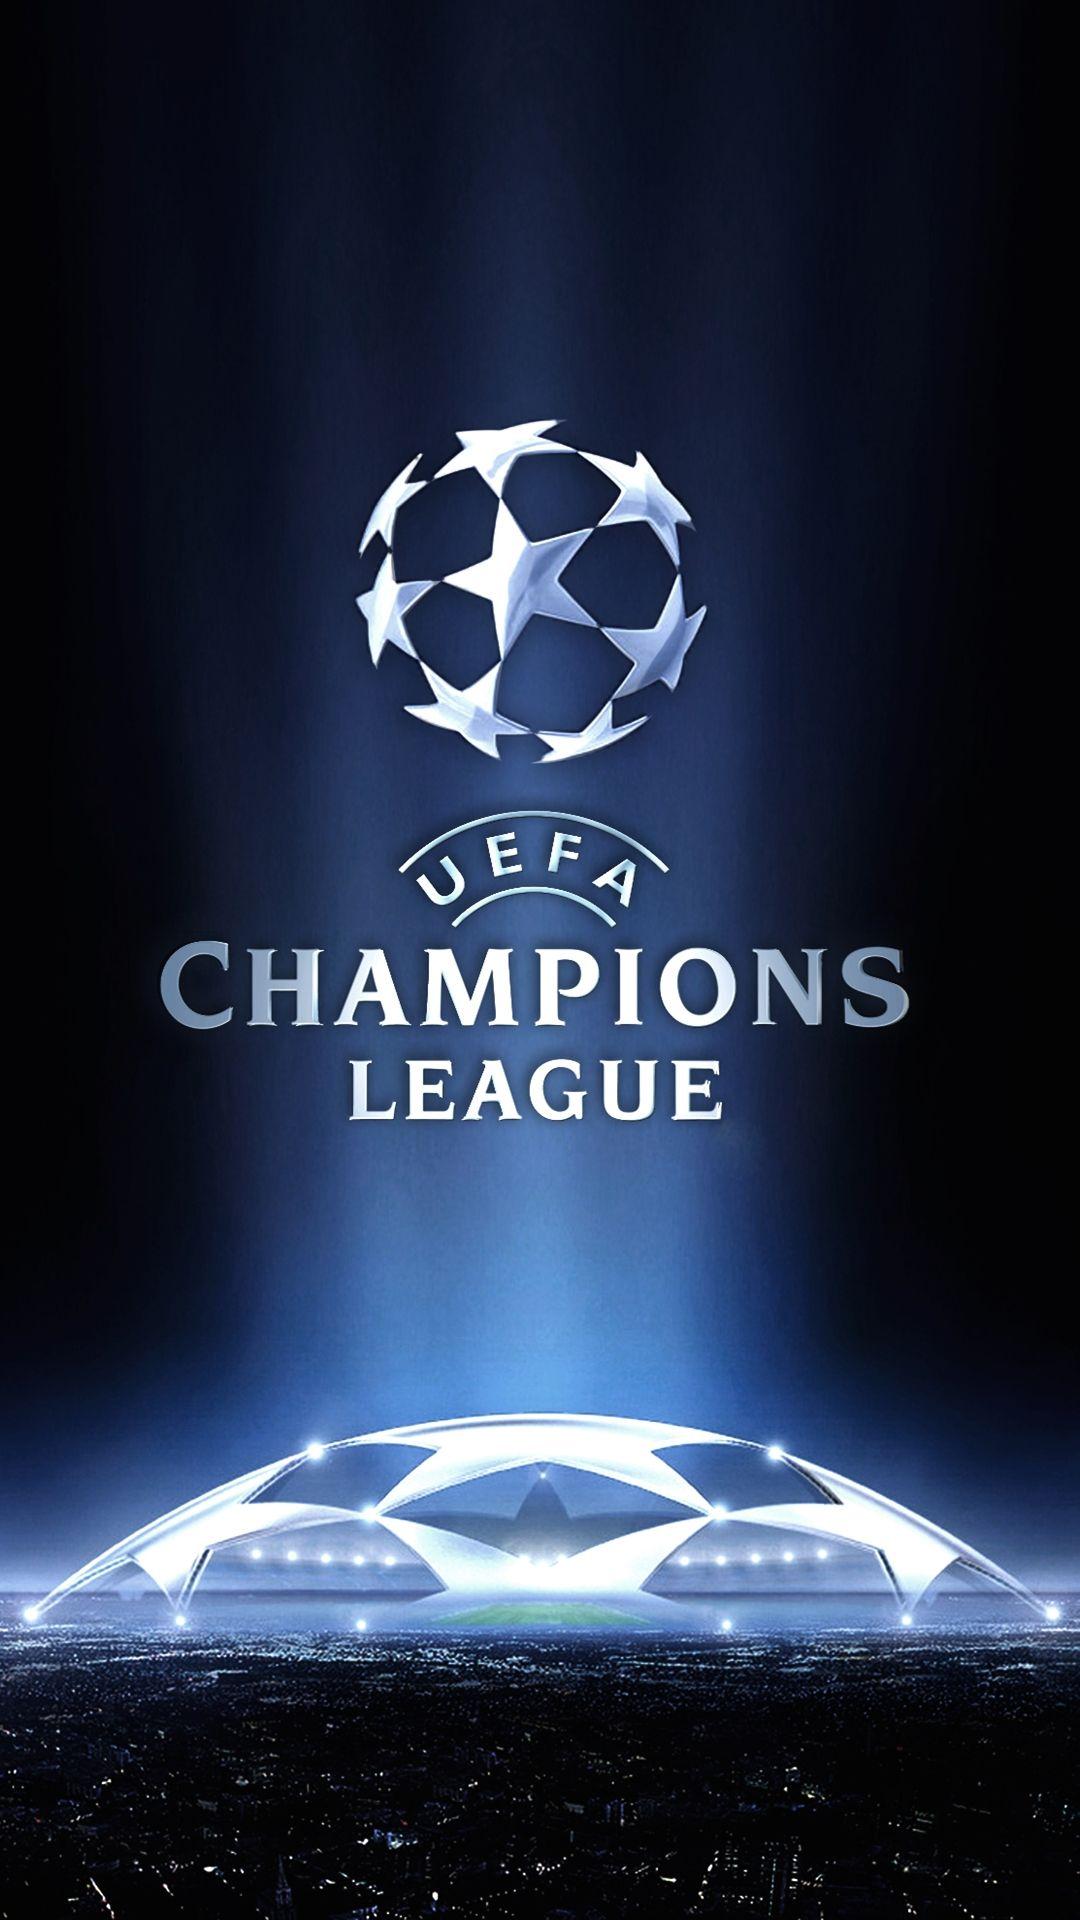 ↑↑TAP AND GET THE FREE APP! Sport UEFA Champions League Logo Navy Blue European Football Soccer Sh. Champions league logo, Champions league, Uefa champions league